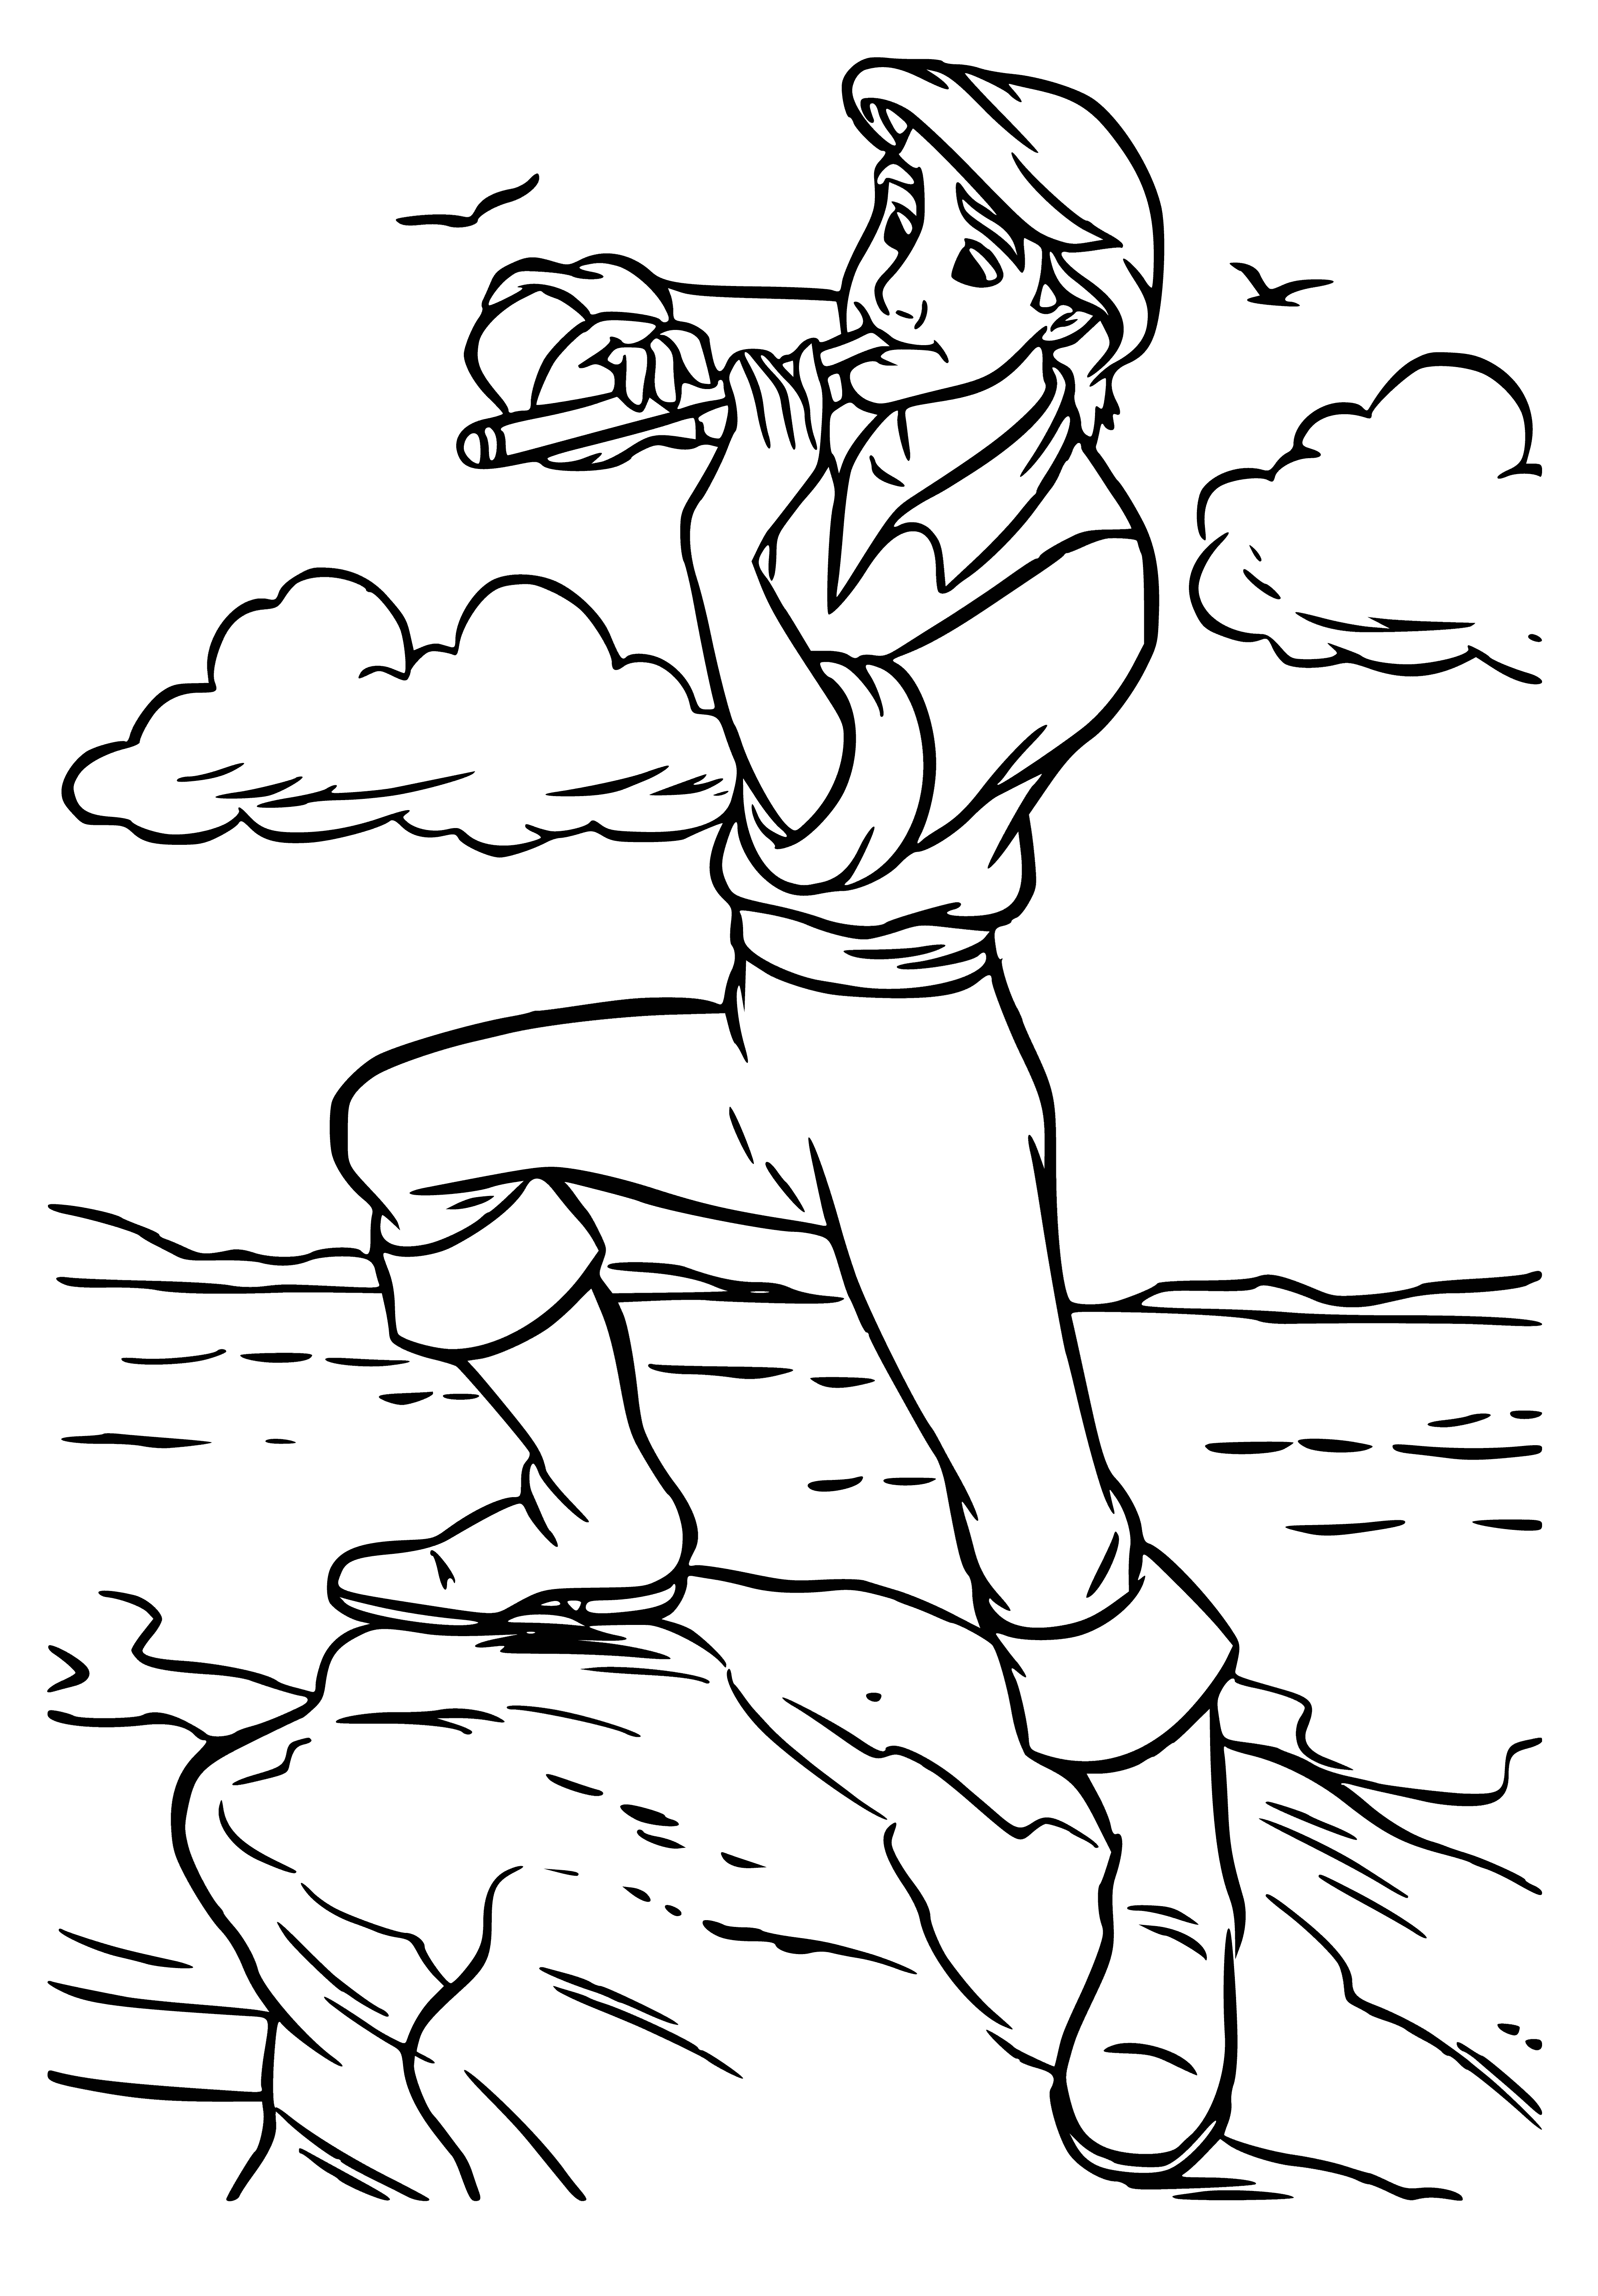 coloring page: Little mermaid sits on a rock, holding a flute and looking at the prince who plays a tune.